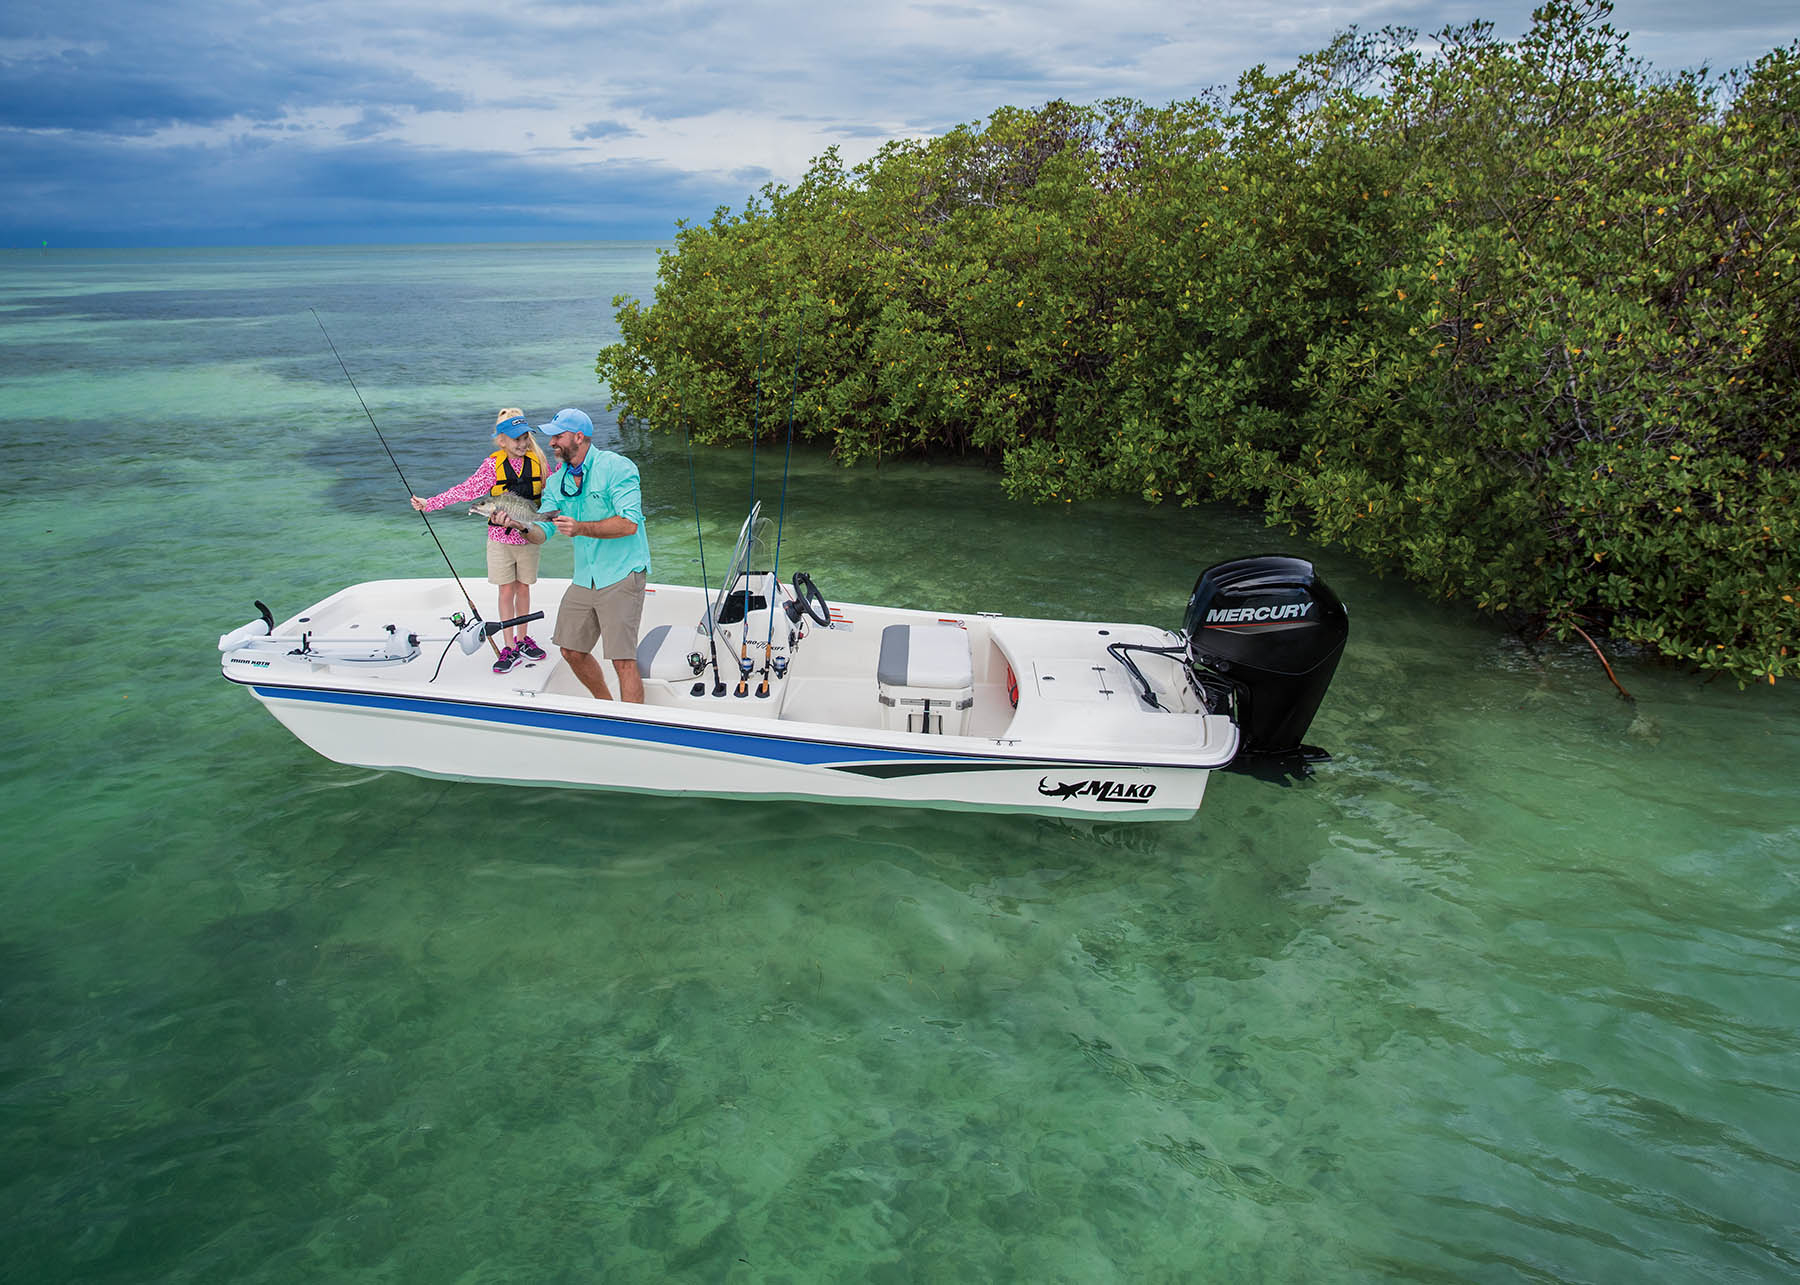 Mako Pro Skiff 17 Cc Prices Specs Reviews And Sales Information Itboat